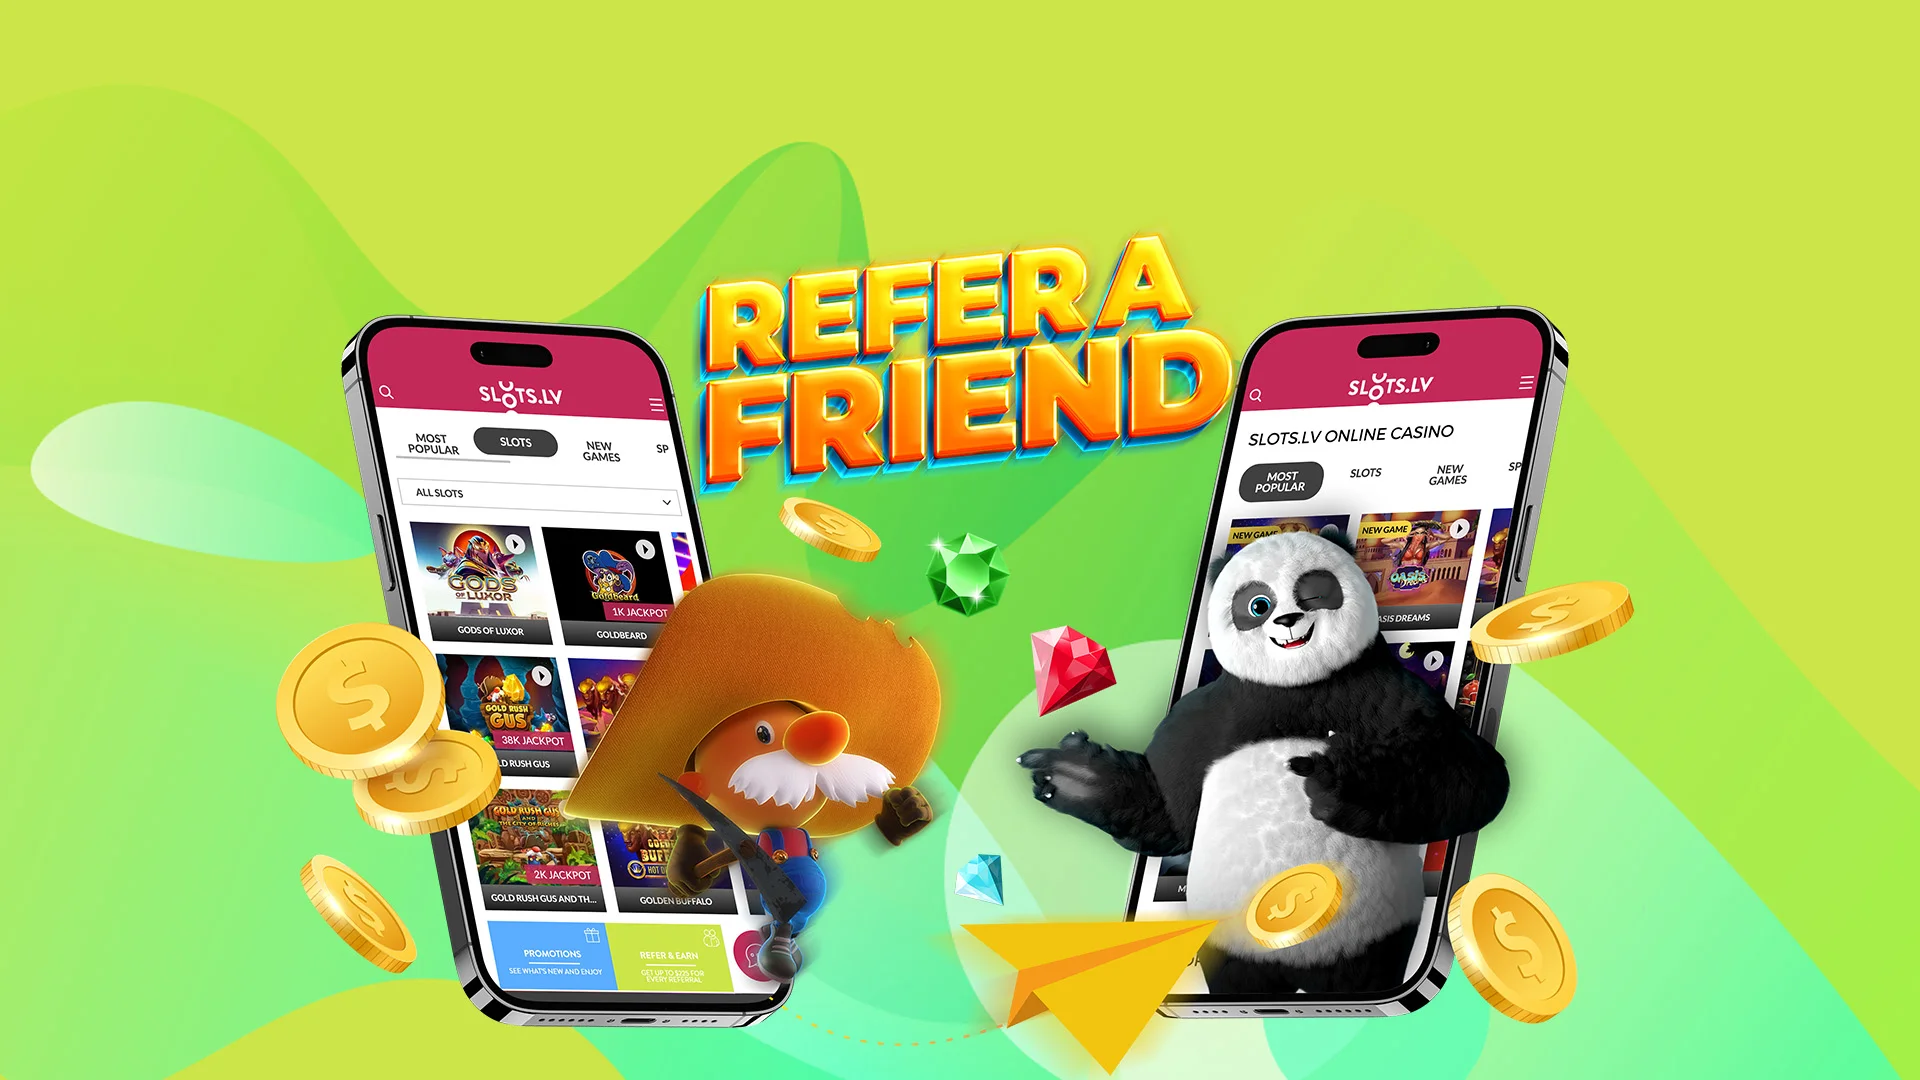 Characters from the SlotsLV slots games Gold Rush Gus and Panda Fortune are emerging out of two mobile phones, with the words Refer A Friend overlaid above, set on a green background